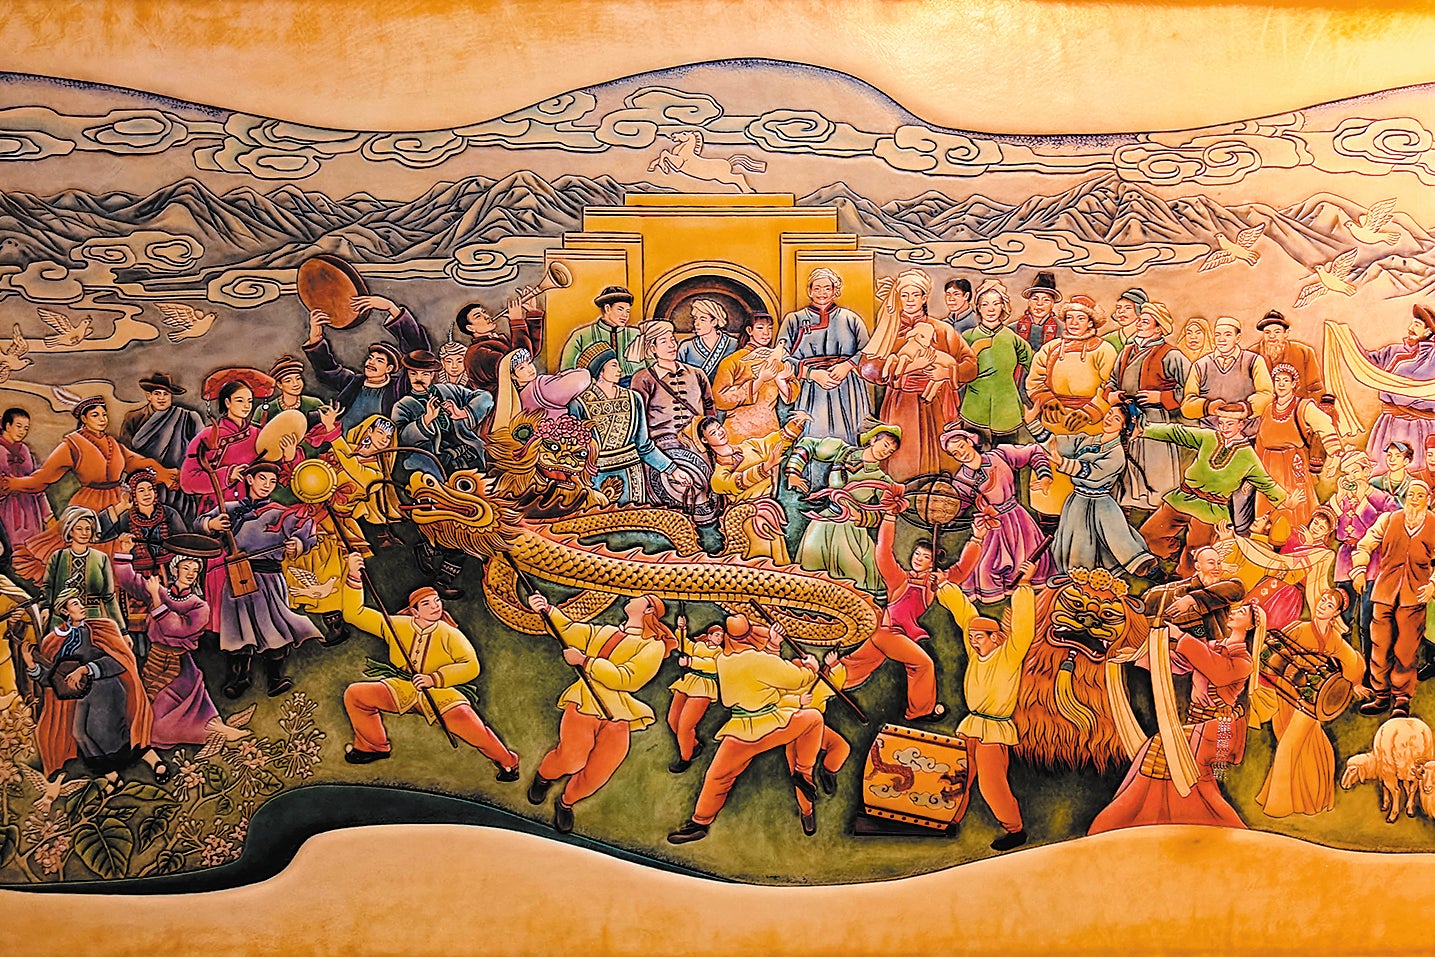 An energetic scene depicts folk customs, including musical performances